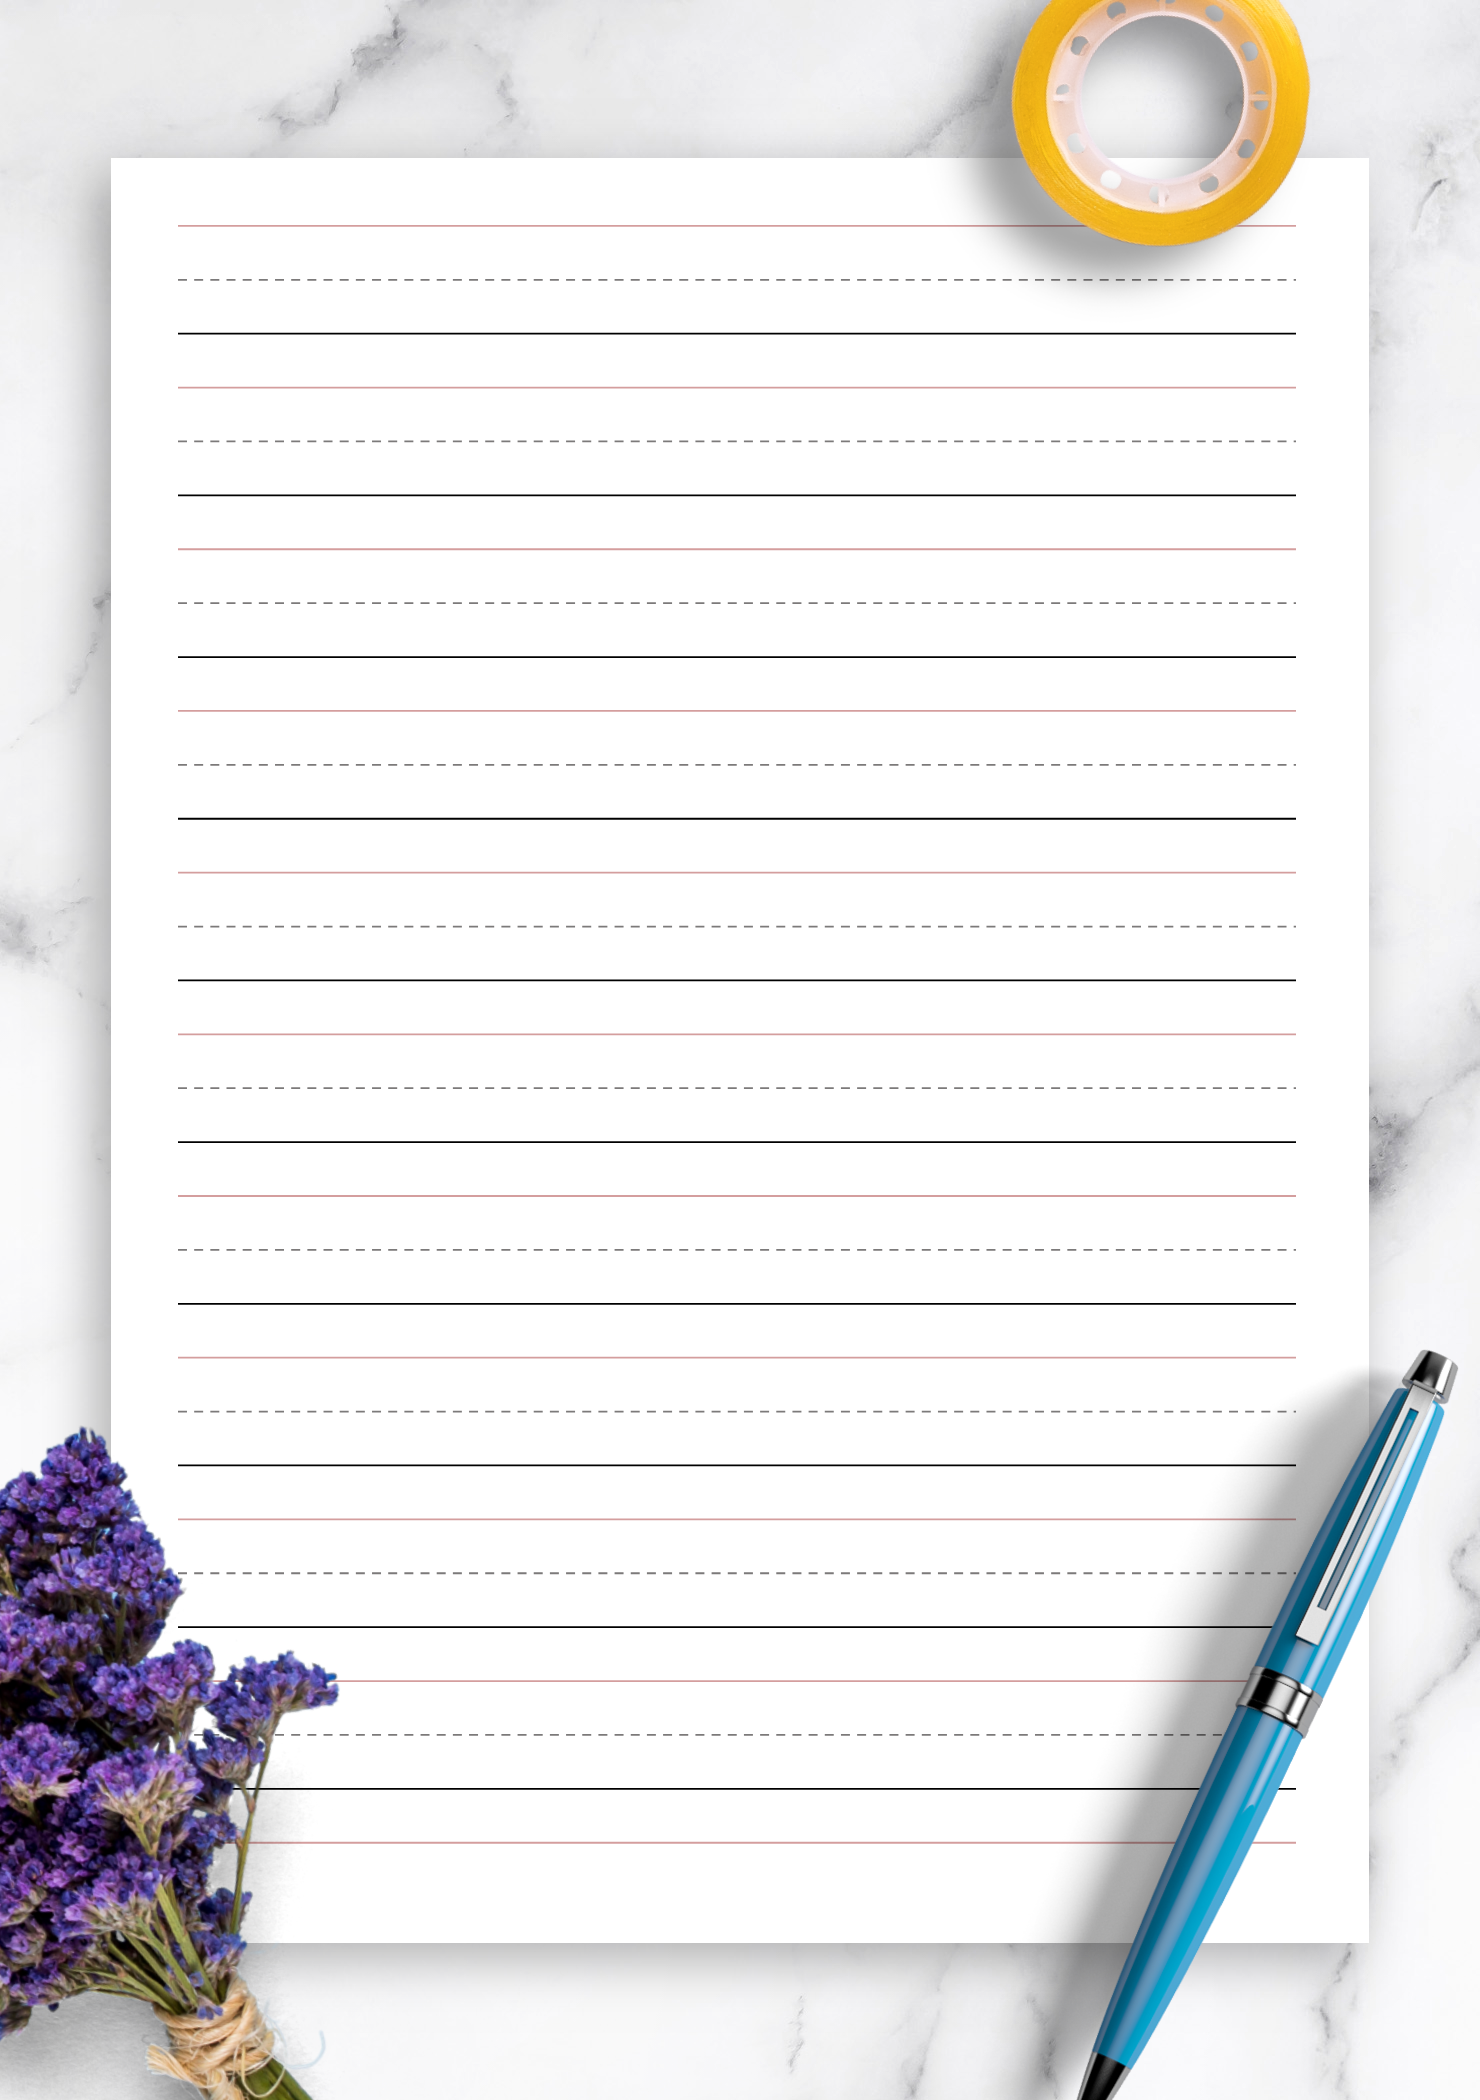 Handwriting Paper: Printable Lined Paper